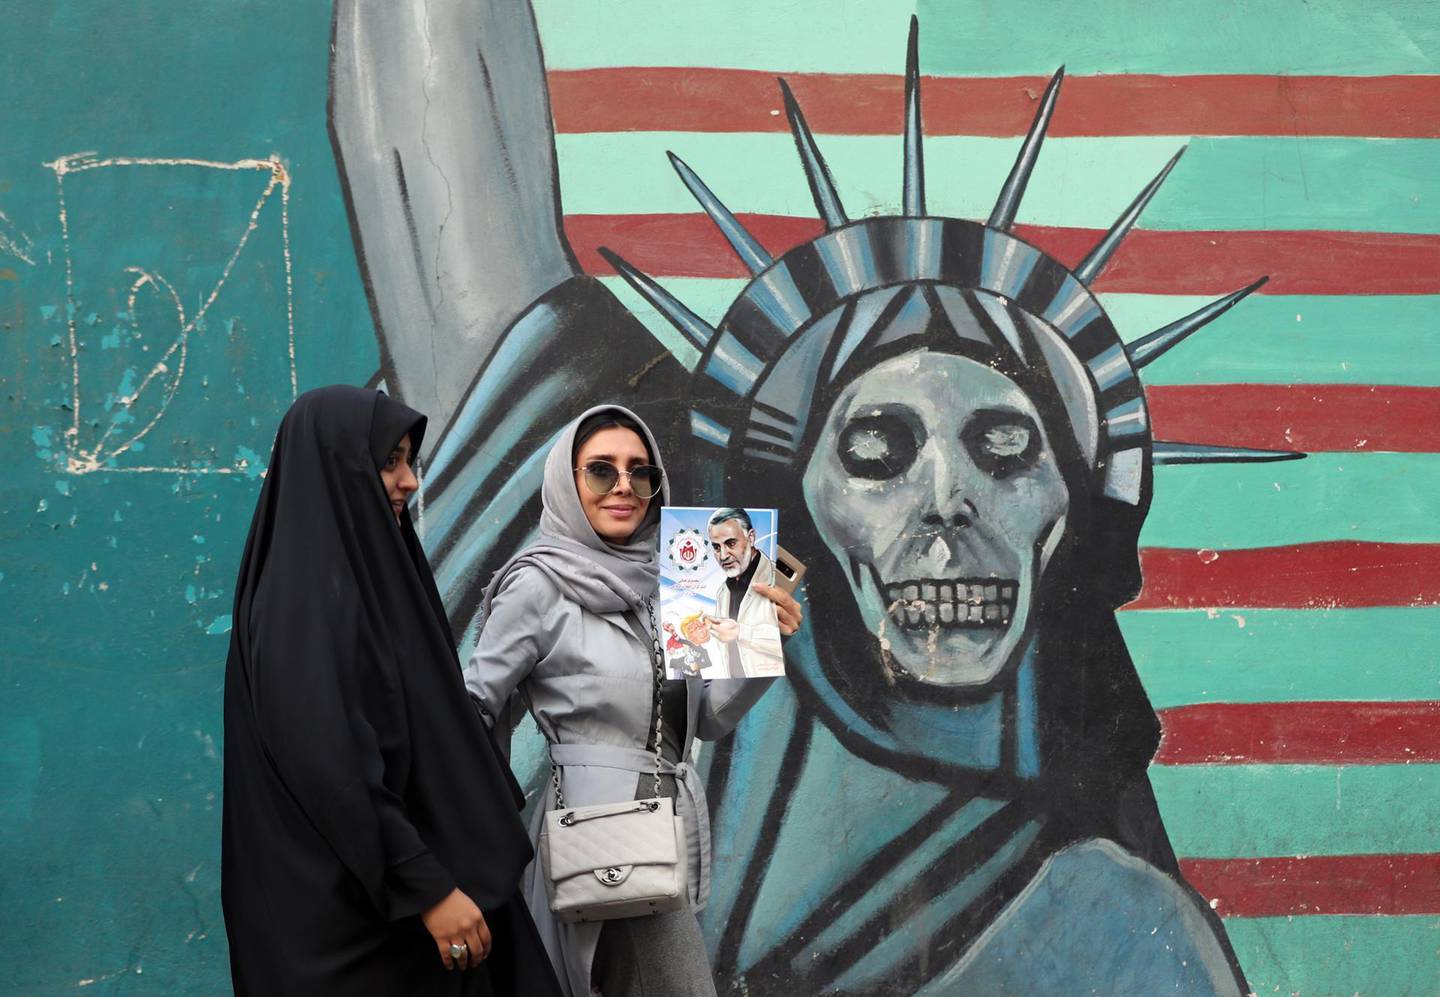 epaselect epa07140552 An Iranian woman (C) holds a poster of Iranian Major General in the Islamic Revolutionary Guard Corps (IRGC) Qasem Soleimani as she walks past a mural depicting a skull-faced Statue of Liberty during an anti-US demonstration marking the 39th anniversary of US Embassy takeover, near the former US embassy in Tehran, Iran, 04 November 2018. Media reported that thousands of protesters chanting 'Death to America' gathered at the former US embassy in Tehran to mark the 39th anniversary of the start of the Iran hostage crisis. Iranian students occupied the embassy on 04 November 1979 after the USA granted permission to the late Iranian Shah to be hospitalized in the States. Over 50 US diplomats and guards were held hostage by students for 444 days. US President Donald J. Trump's administration announced on 02 November 2018, that it will reimpose sanctions against Iran that had been waived under the 2015 Iran nuclear deal (the Joint Comprehensive Plan of Action, JCPOA). The US sanctions will take effect on 05 November 2018, covering Iran's shipping, financial and energy sectors. In 2015, five nations, including the United States, worked out a deal with the Middle Eastern country that withdrew the sanctions, one of former US President Barack Obama's biggest diplomatic achievements.  EPA/ABEDIN TAHERKENAREH